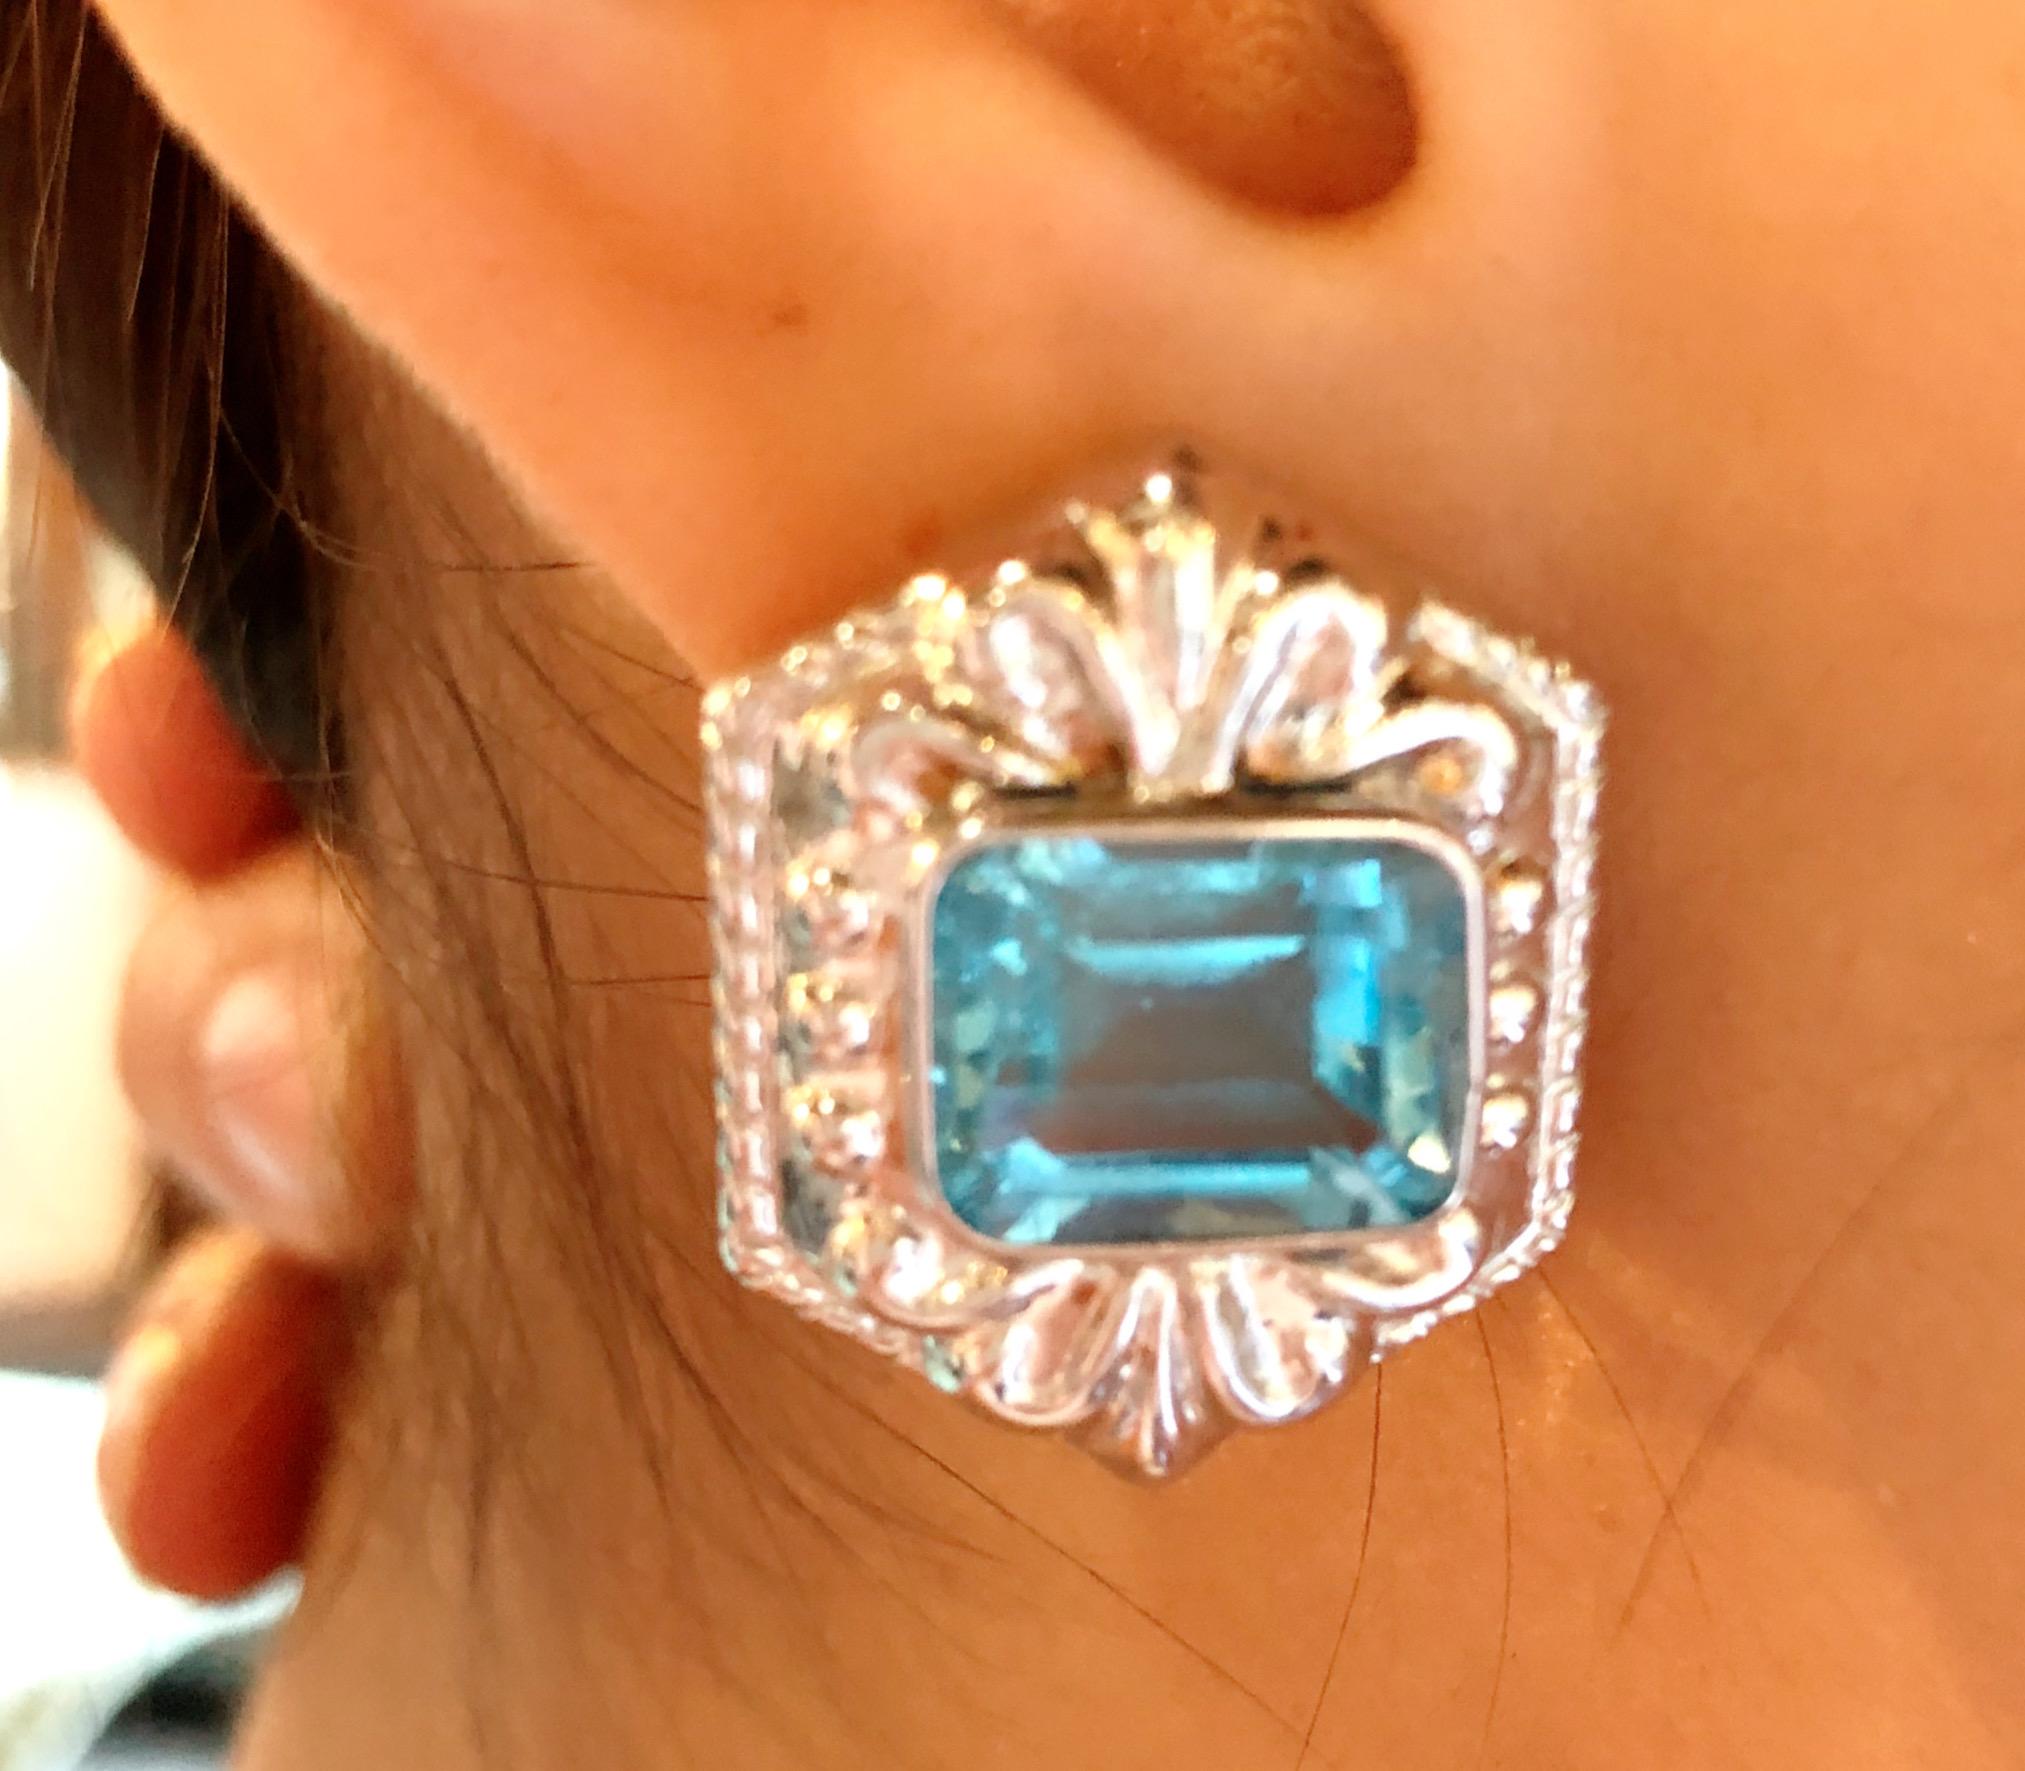 14 Karat White Gold French Back Huggie Earrings with Blue Topaz In Good Condition For Sale In Stamford, CT